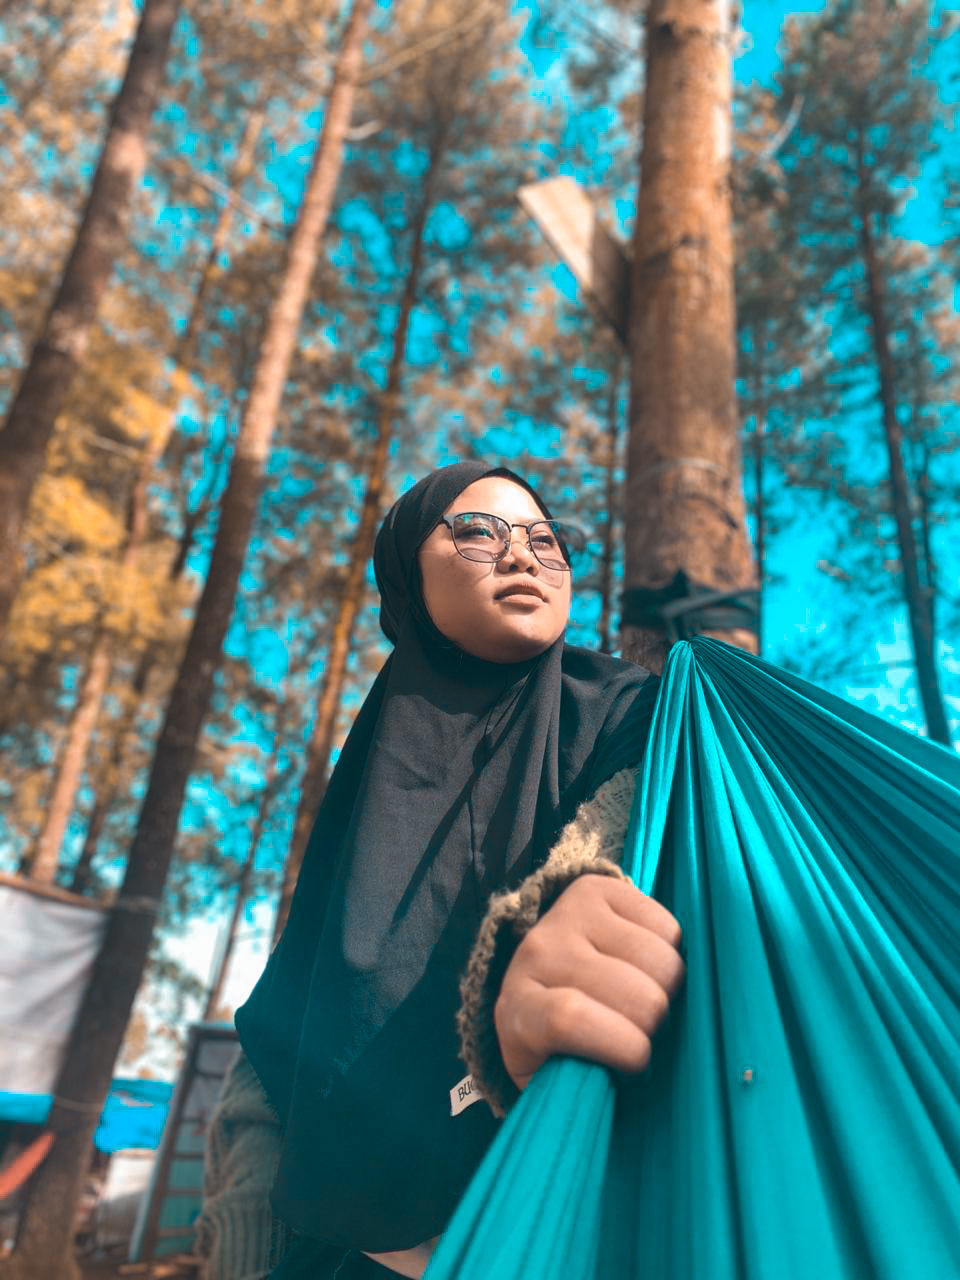 blue, tree, adult, one person, women, forest, spring, clothing, nature, smiling, happiness, young adult, plant, lifestyles, green, land, portrait, emotion, female, religion, outdoors, looking, standing, looking up, leisure activity, fashion, dress, traditional clothing, hijab, spirituality, autumn, woodland, cheerful, belief, photo shoot, day